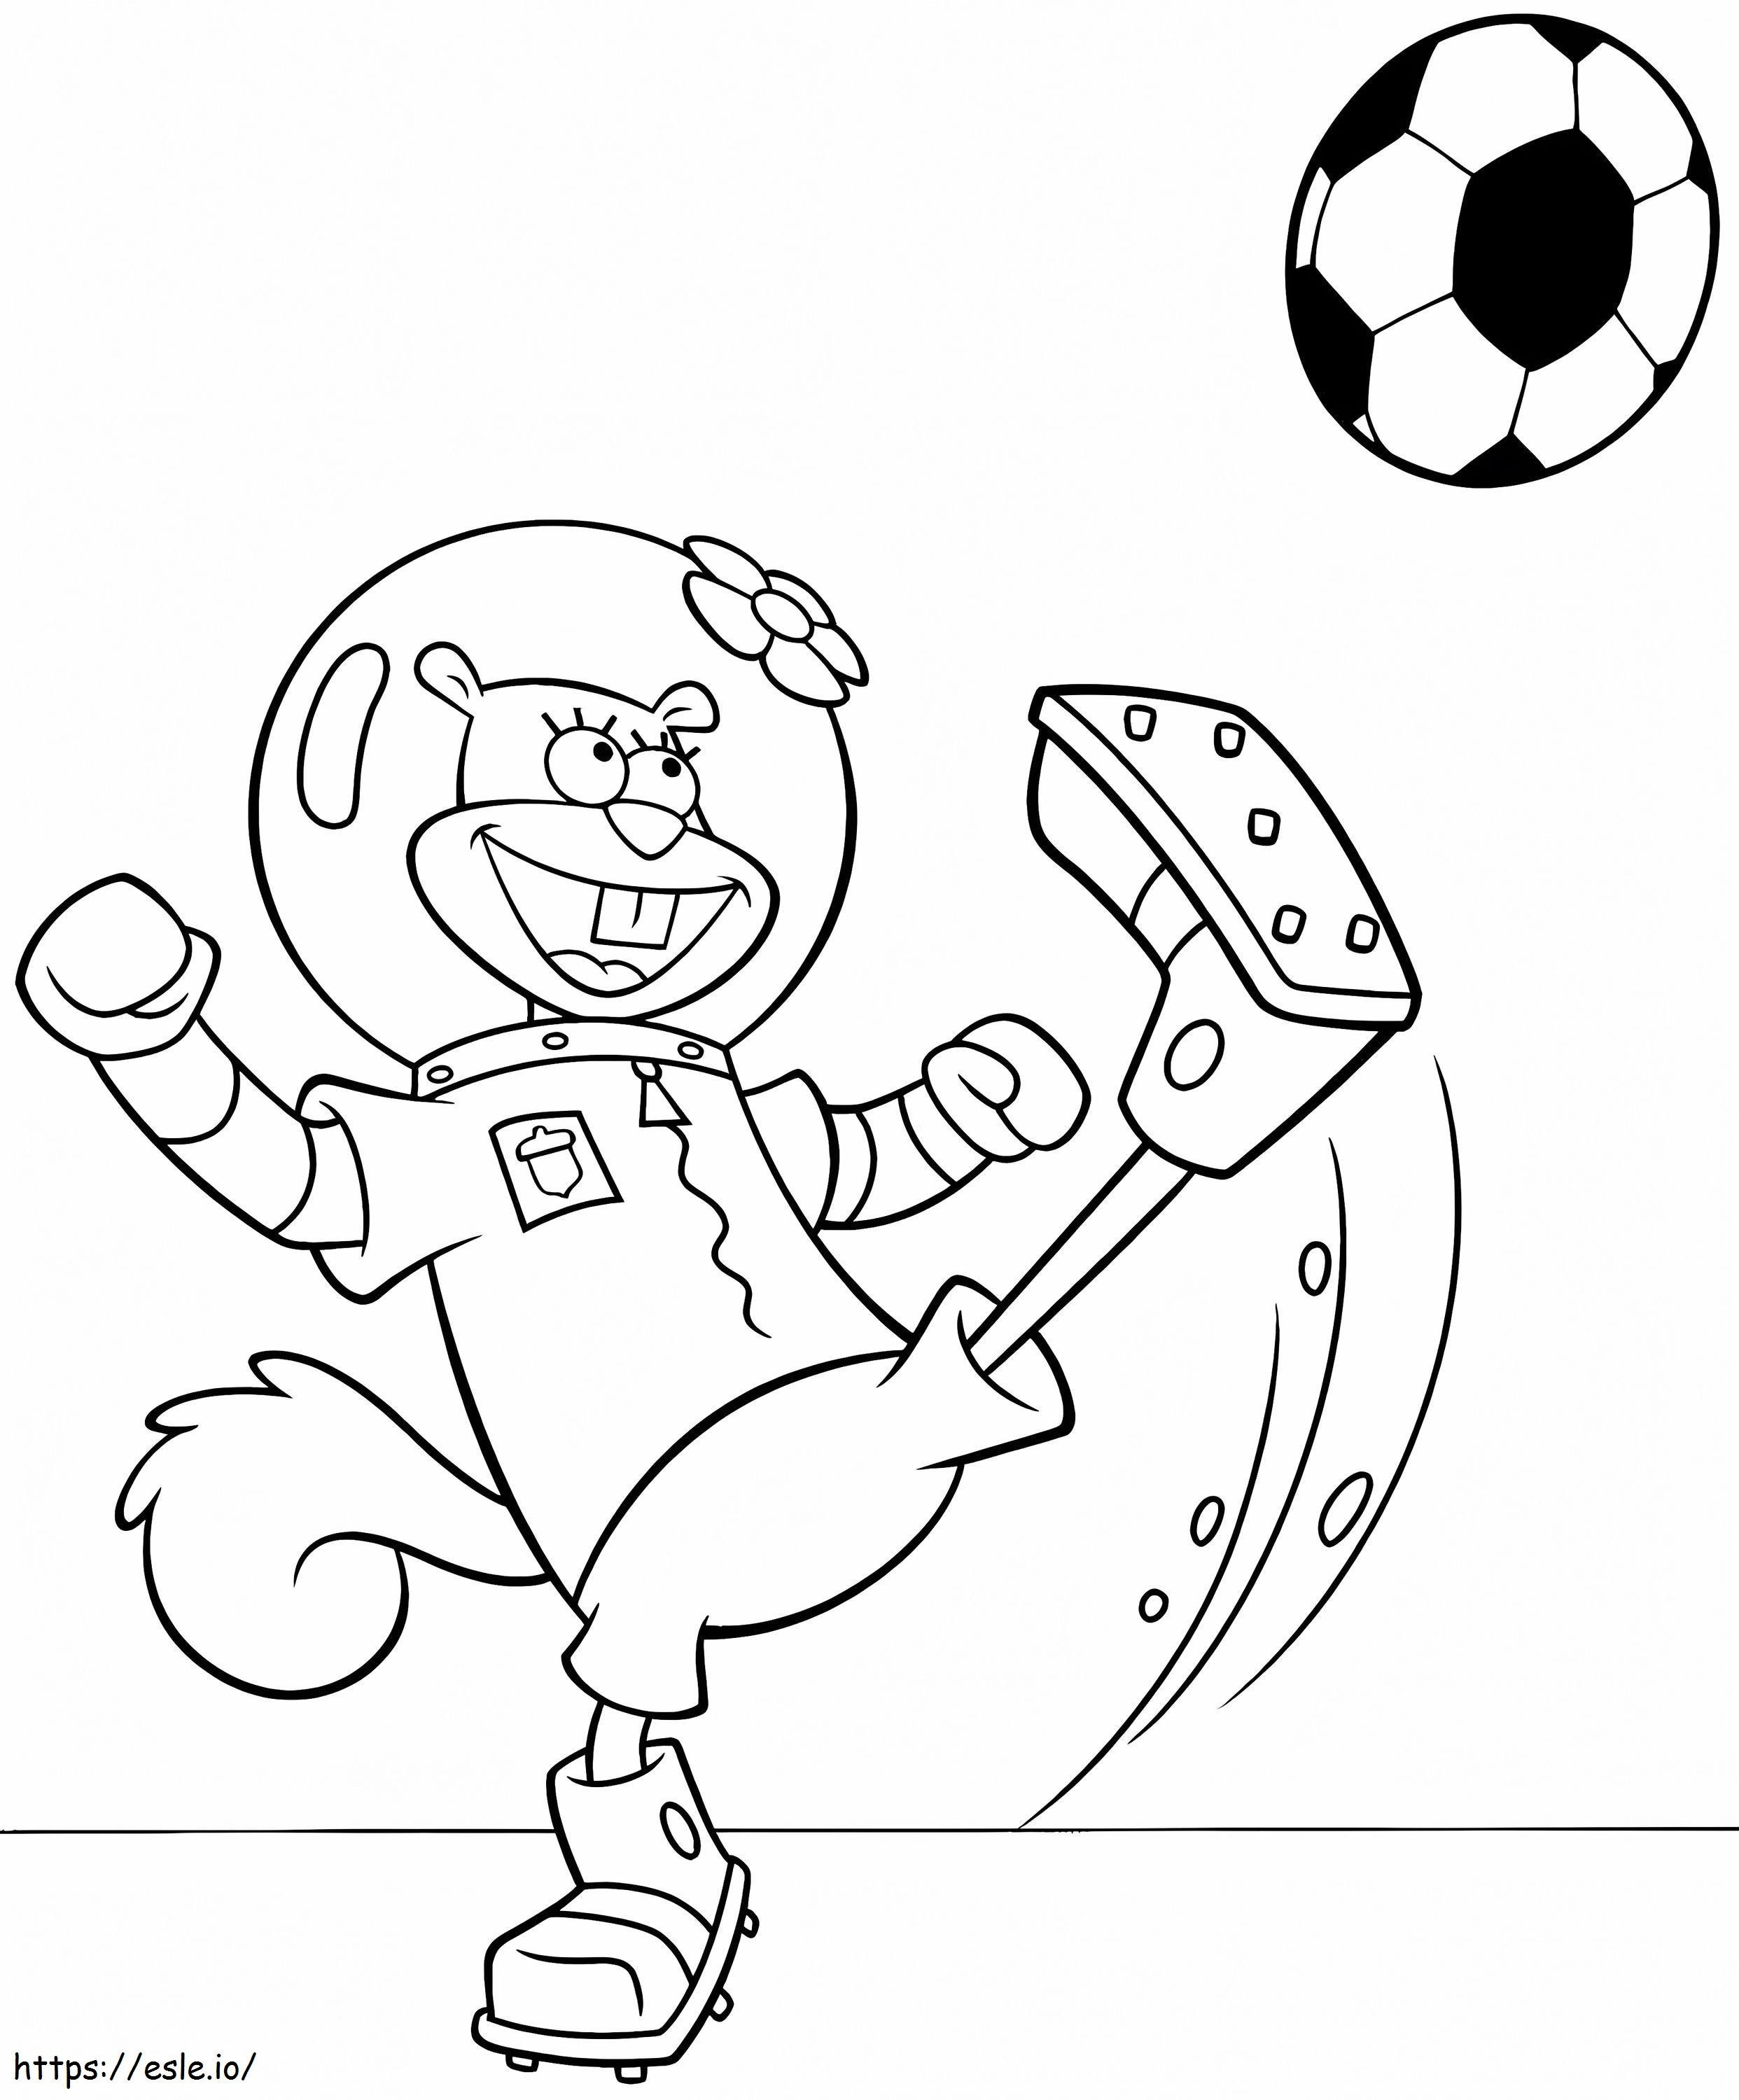 Sandy Cheeks Playing Soccer coloring page